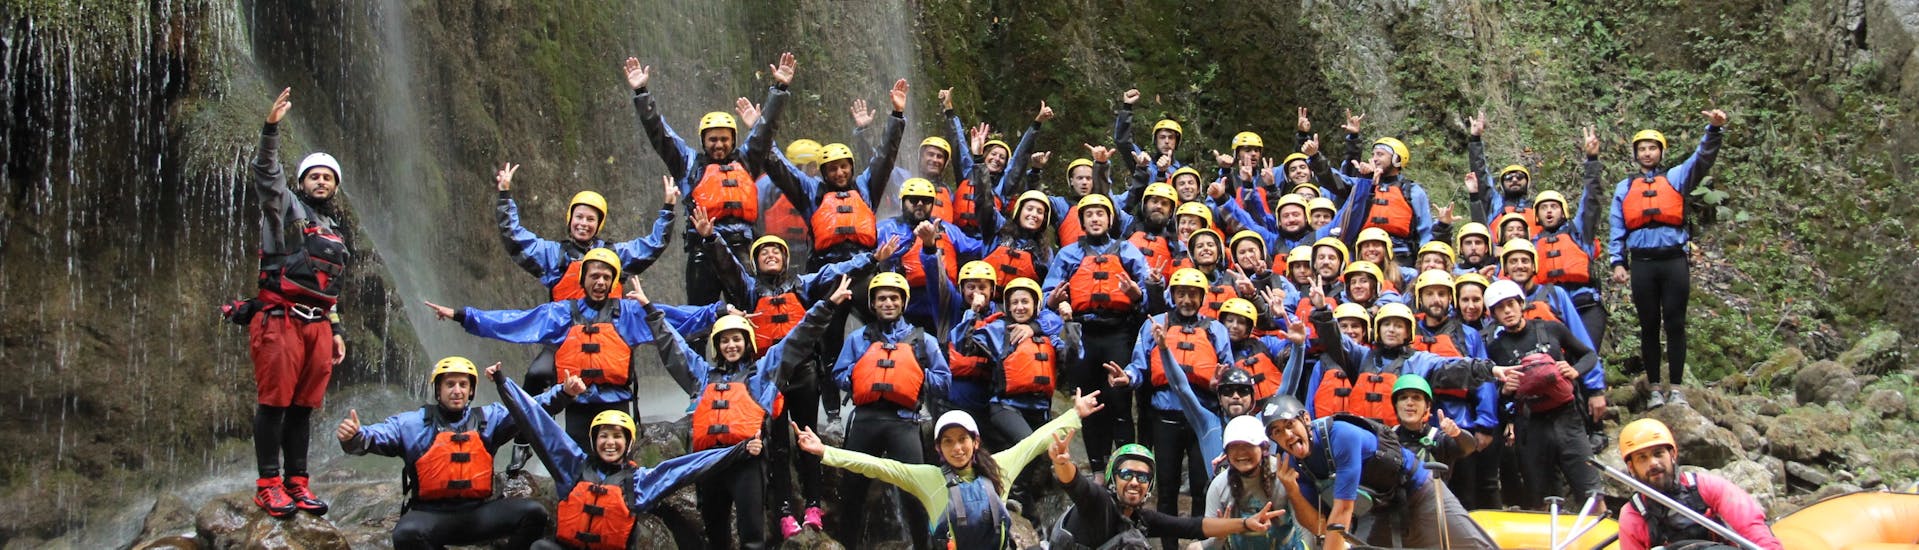 All the group gathered for a beautiful of picture full of joy and happiness during the Adventure Rafting in the Lao Gorges with Pollino Rafting.